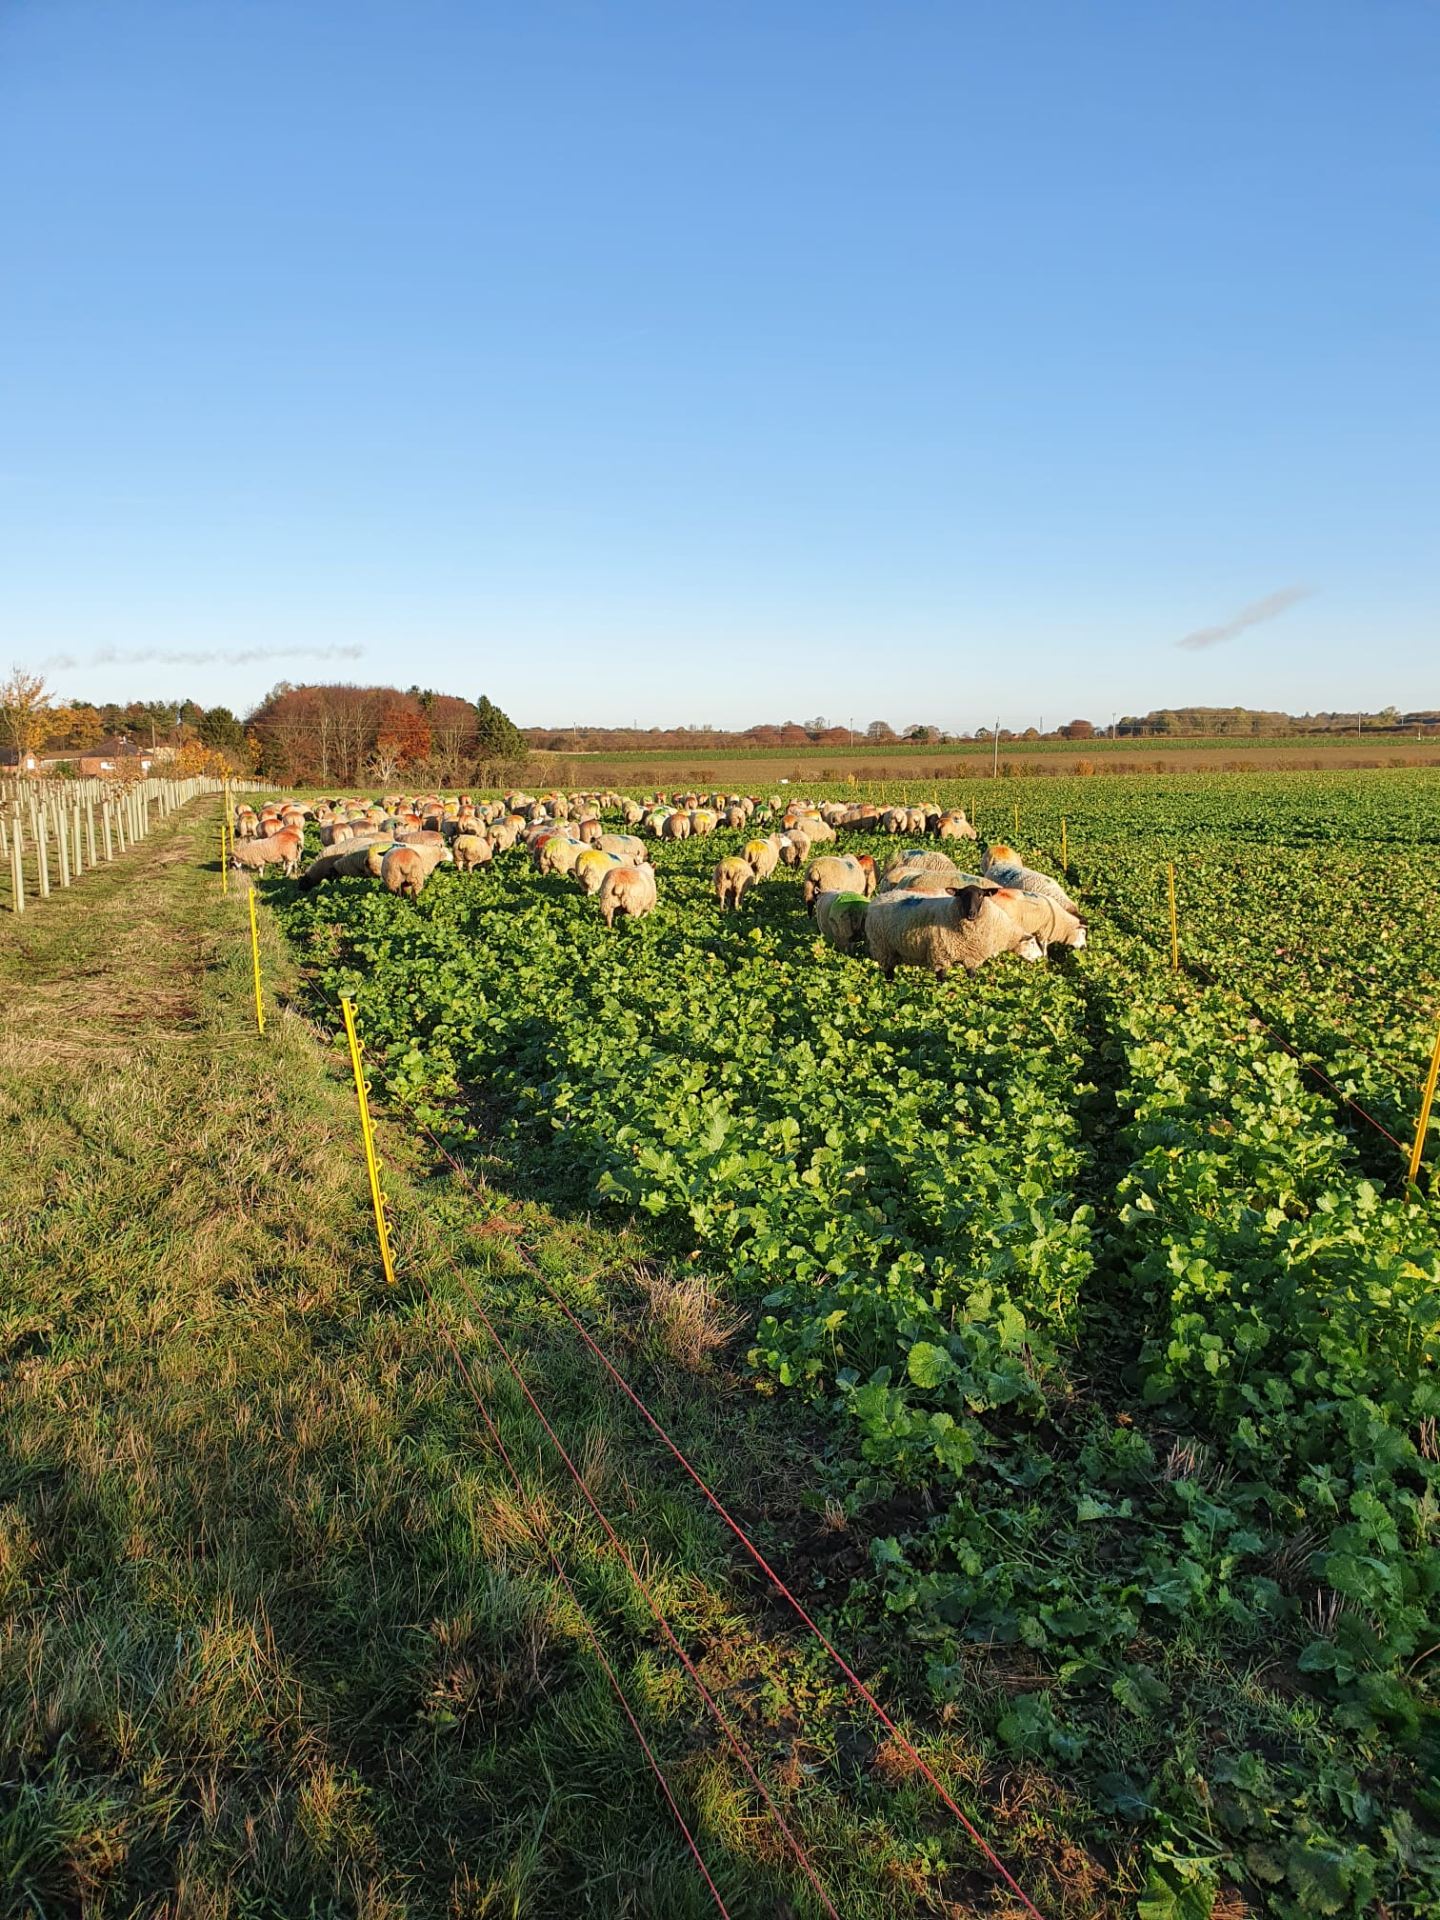 Image of sheep grazing cover crops in a field